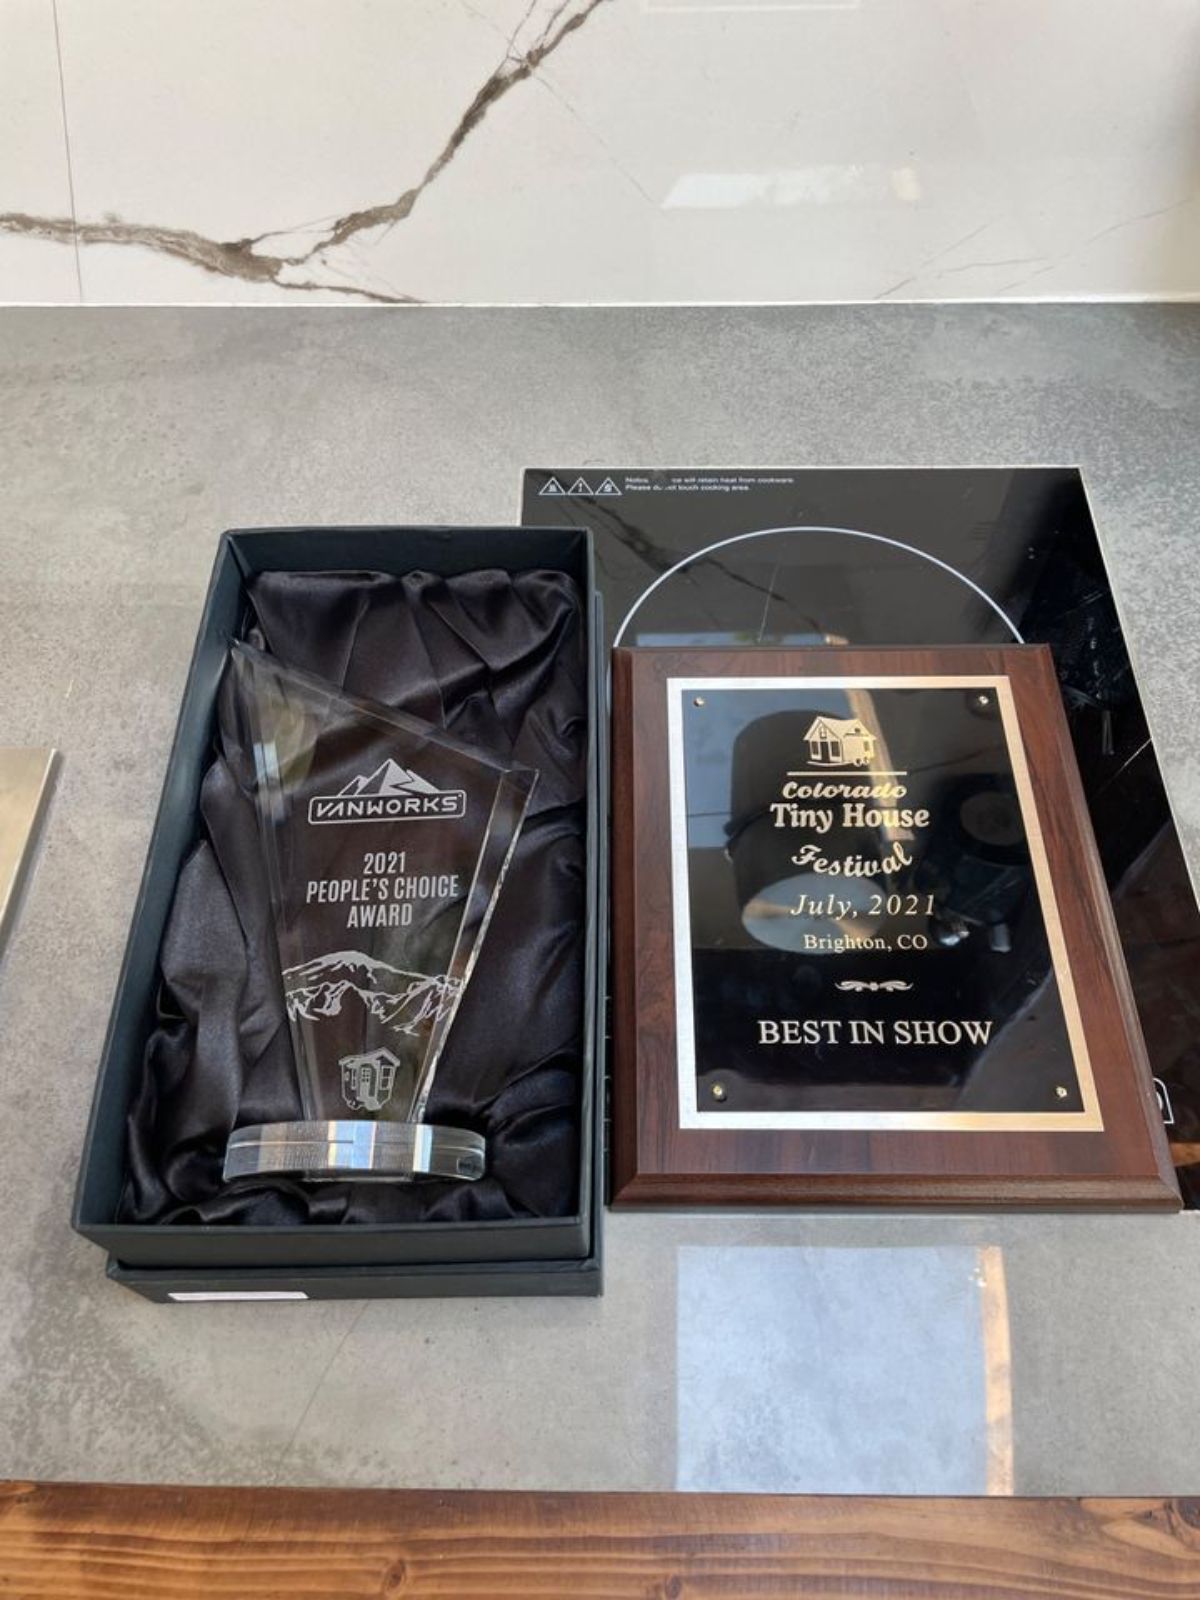 best in the show awards at tiny house festival on 2021